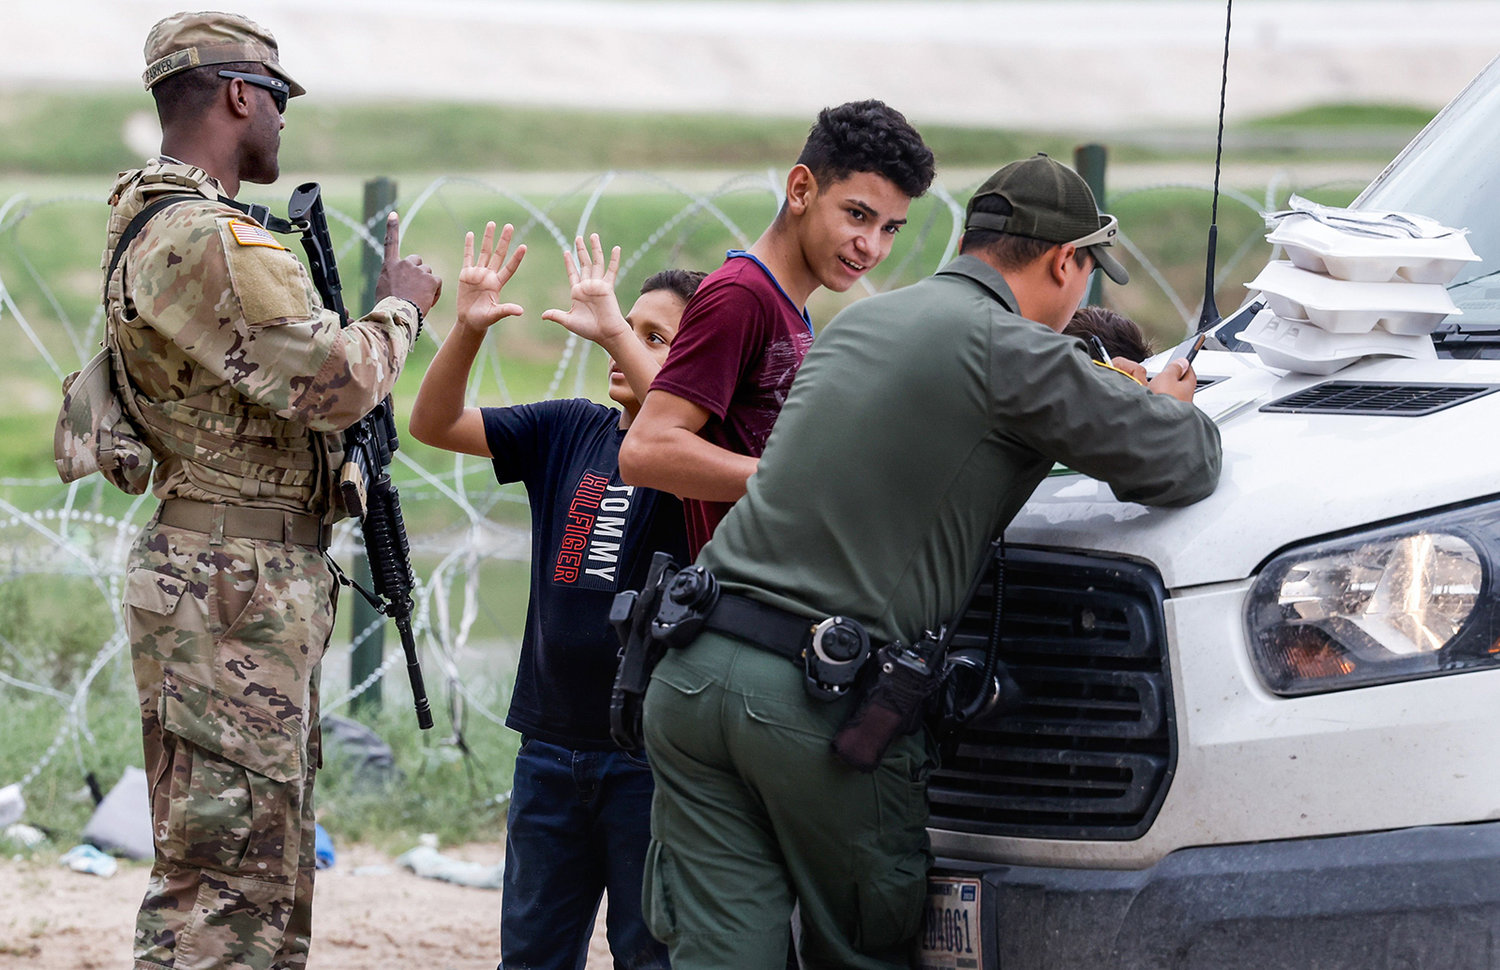 A migrant boy holds his hands up to indicate that he is 10 years old after being asked his age by a National Guard officer after he was detained crossing the Rio Grande with another child and a young boy in Eagle Pass on June 2, 2022. (Lola Gomez/Dallas Morning News/TNS)